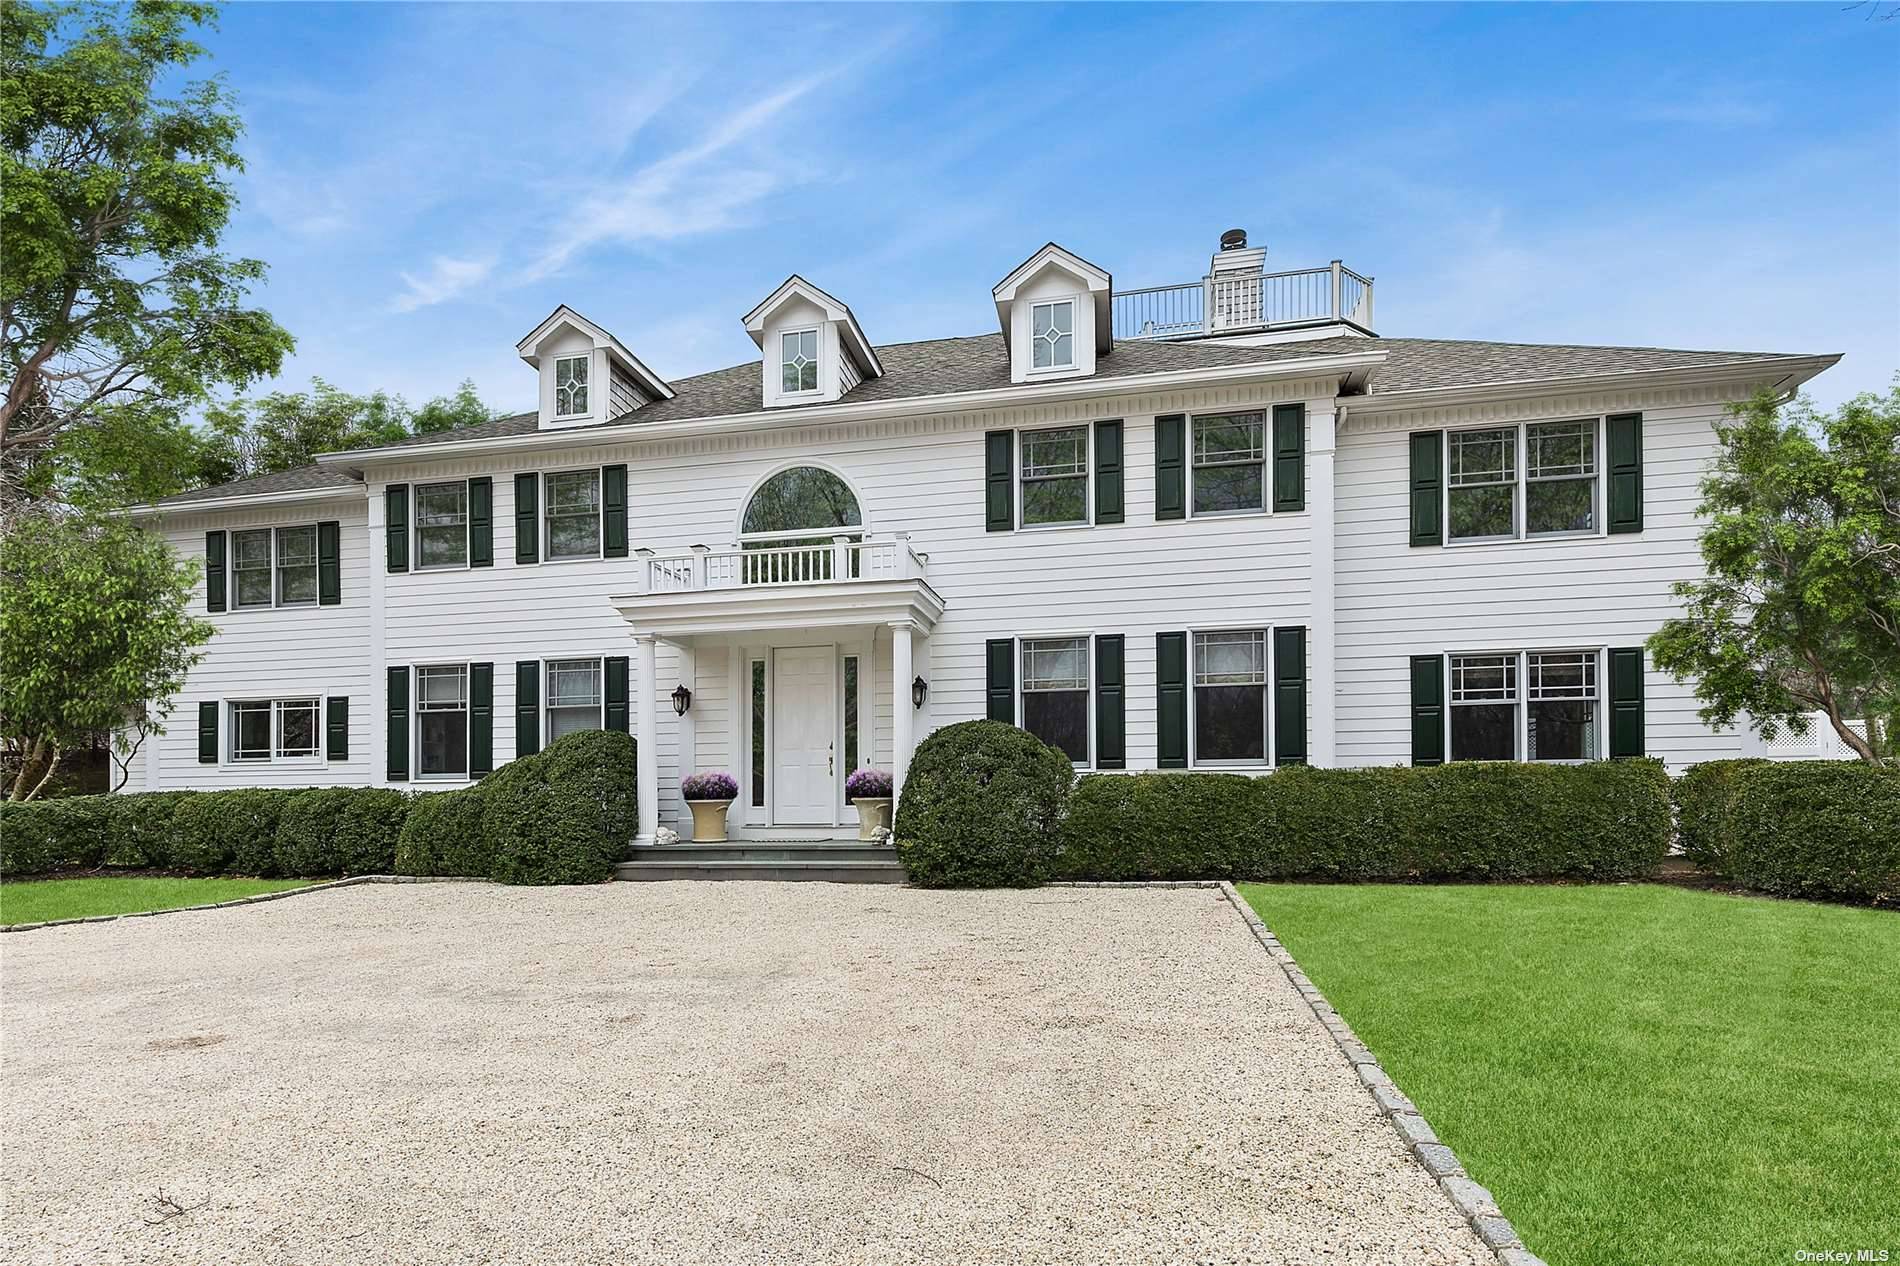 Secluded, Elegant, Private Drive up a landscape lit 350 foot Belgian block curbed driveway to this elegant 5, 250 sf, 6 bed 6.